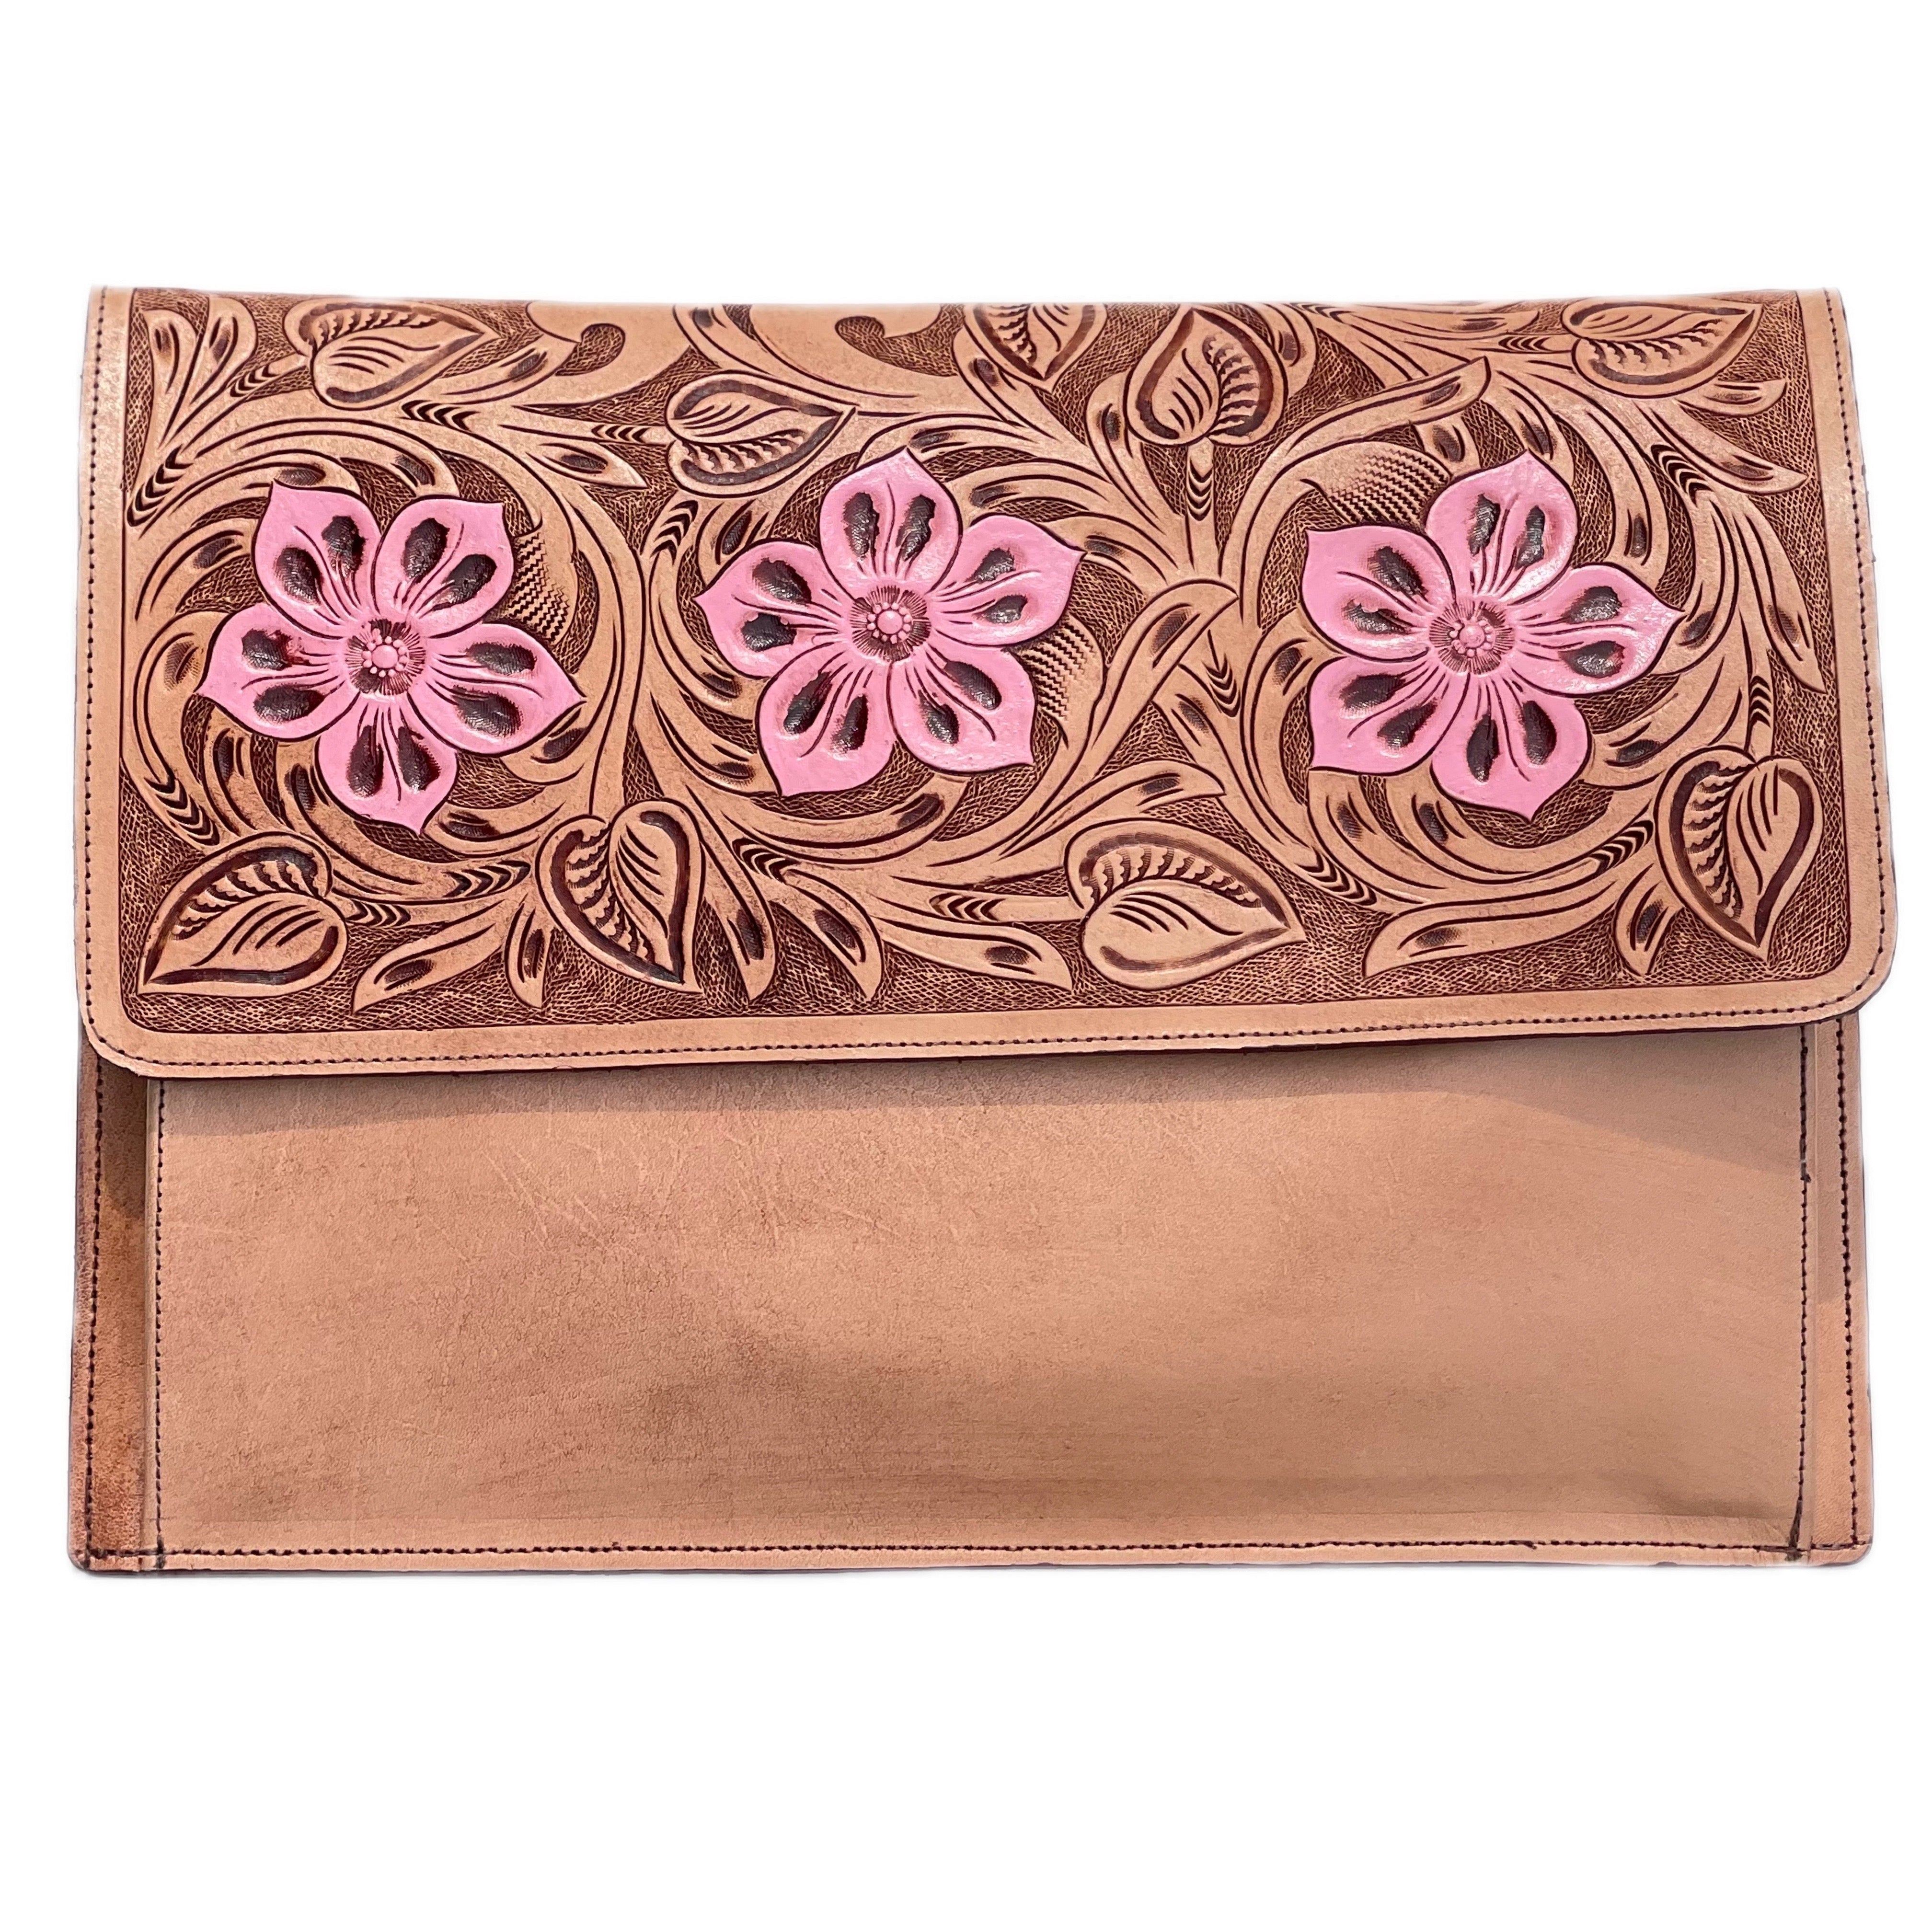 FLORES LAPTOP SLEEVE - PINK AND TAN